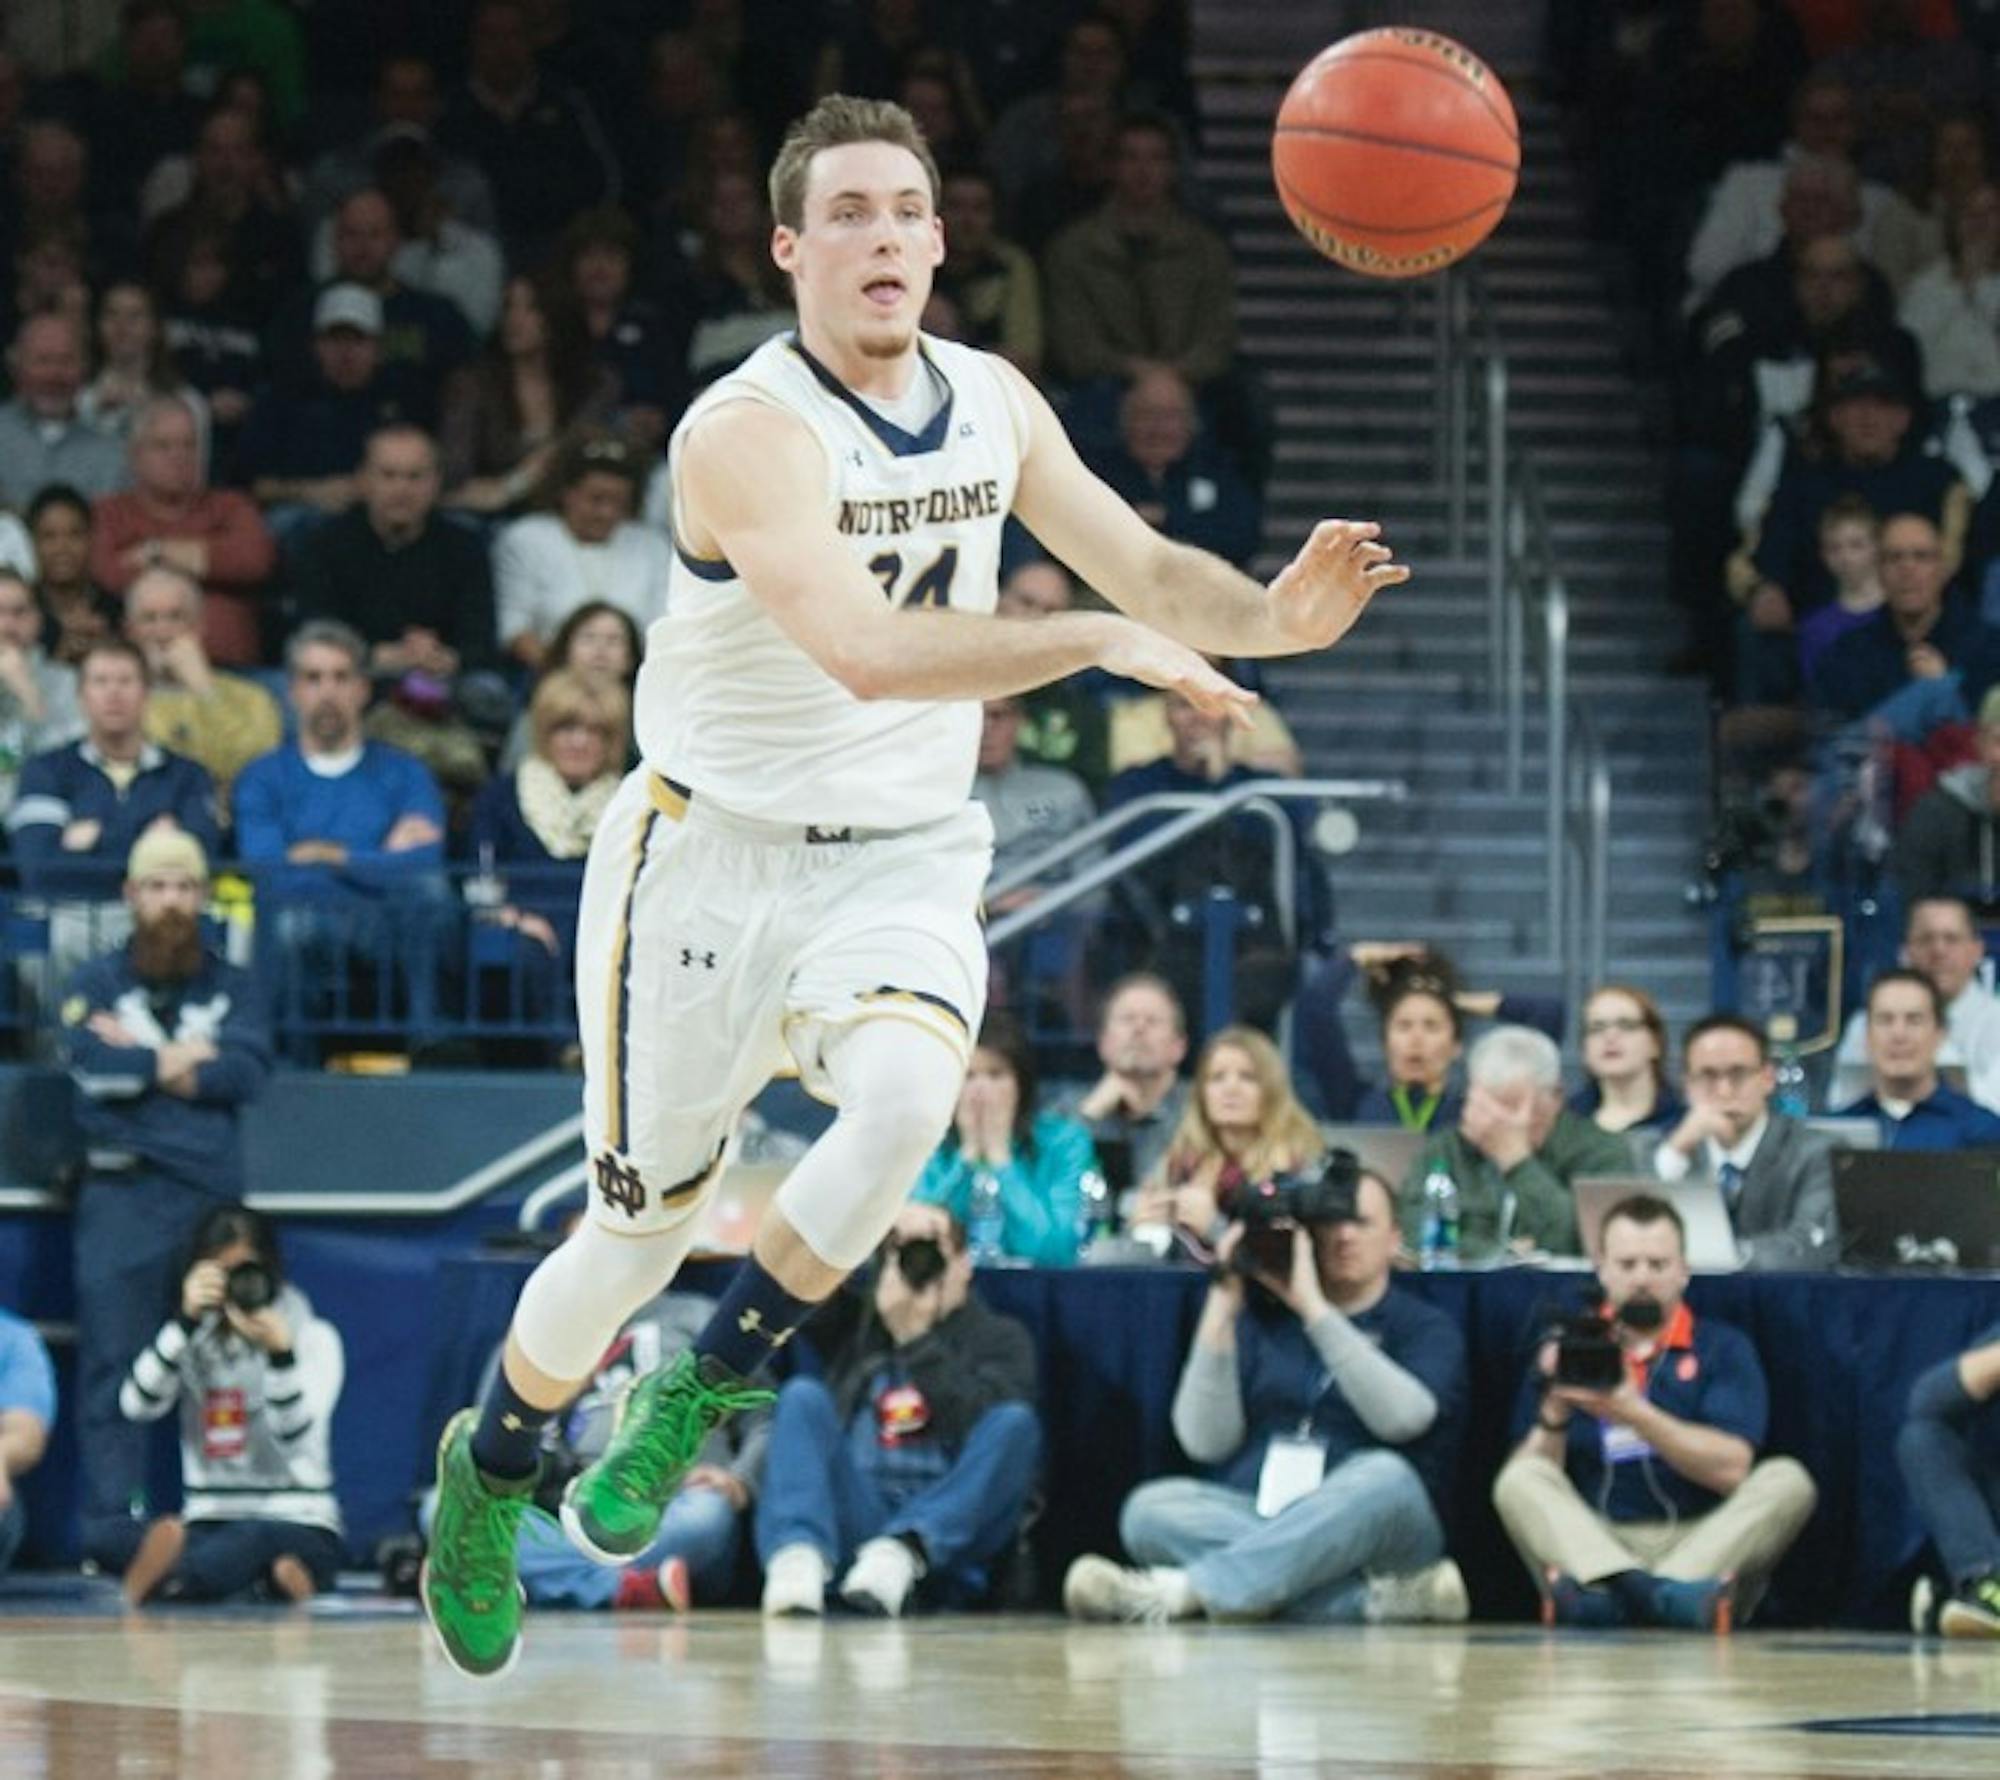 Irish senior guard/forward Pat Connaughton fires a pass downcourt during Notre Dame's 65-60 loss to Syracuse.